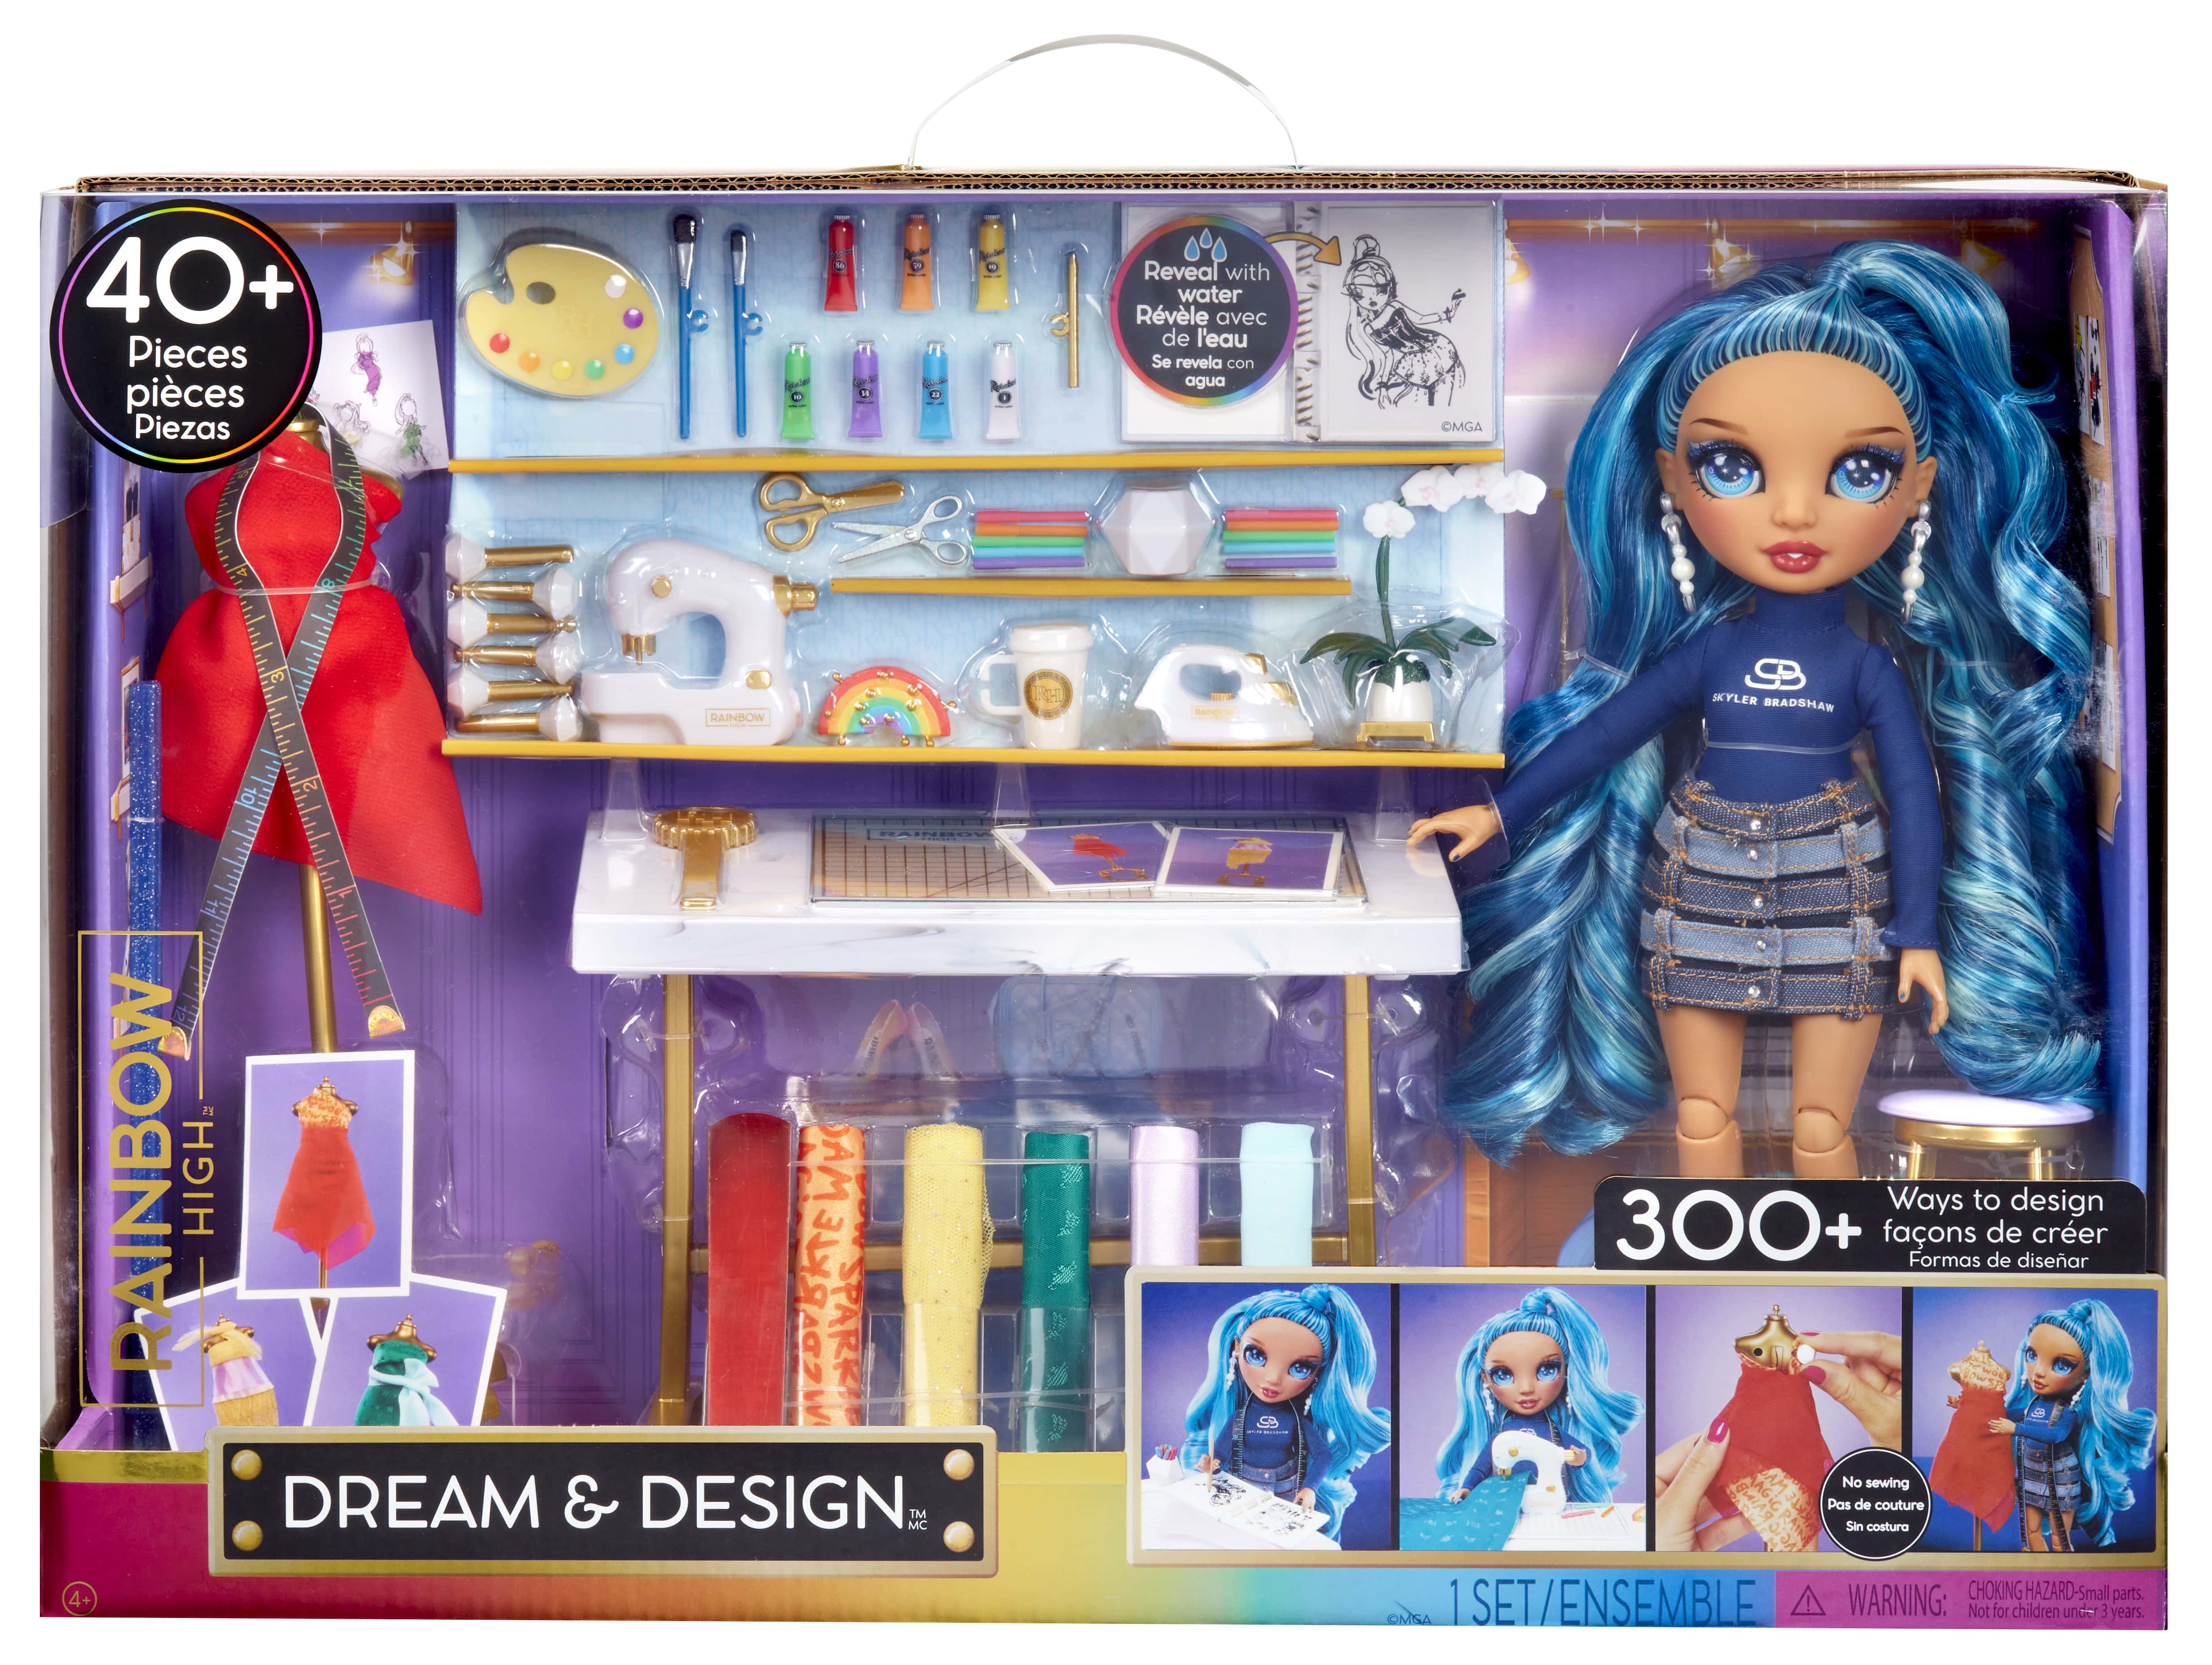 Rainbow High Dream & Design Fashion Studio, Designer Playset with Collectible Blue Skyler Doll +Easy No Sew Fashion Kit Kids Toy Gift 4-12 - image 1 of 8